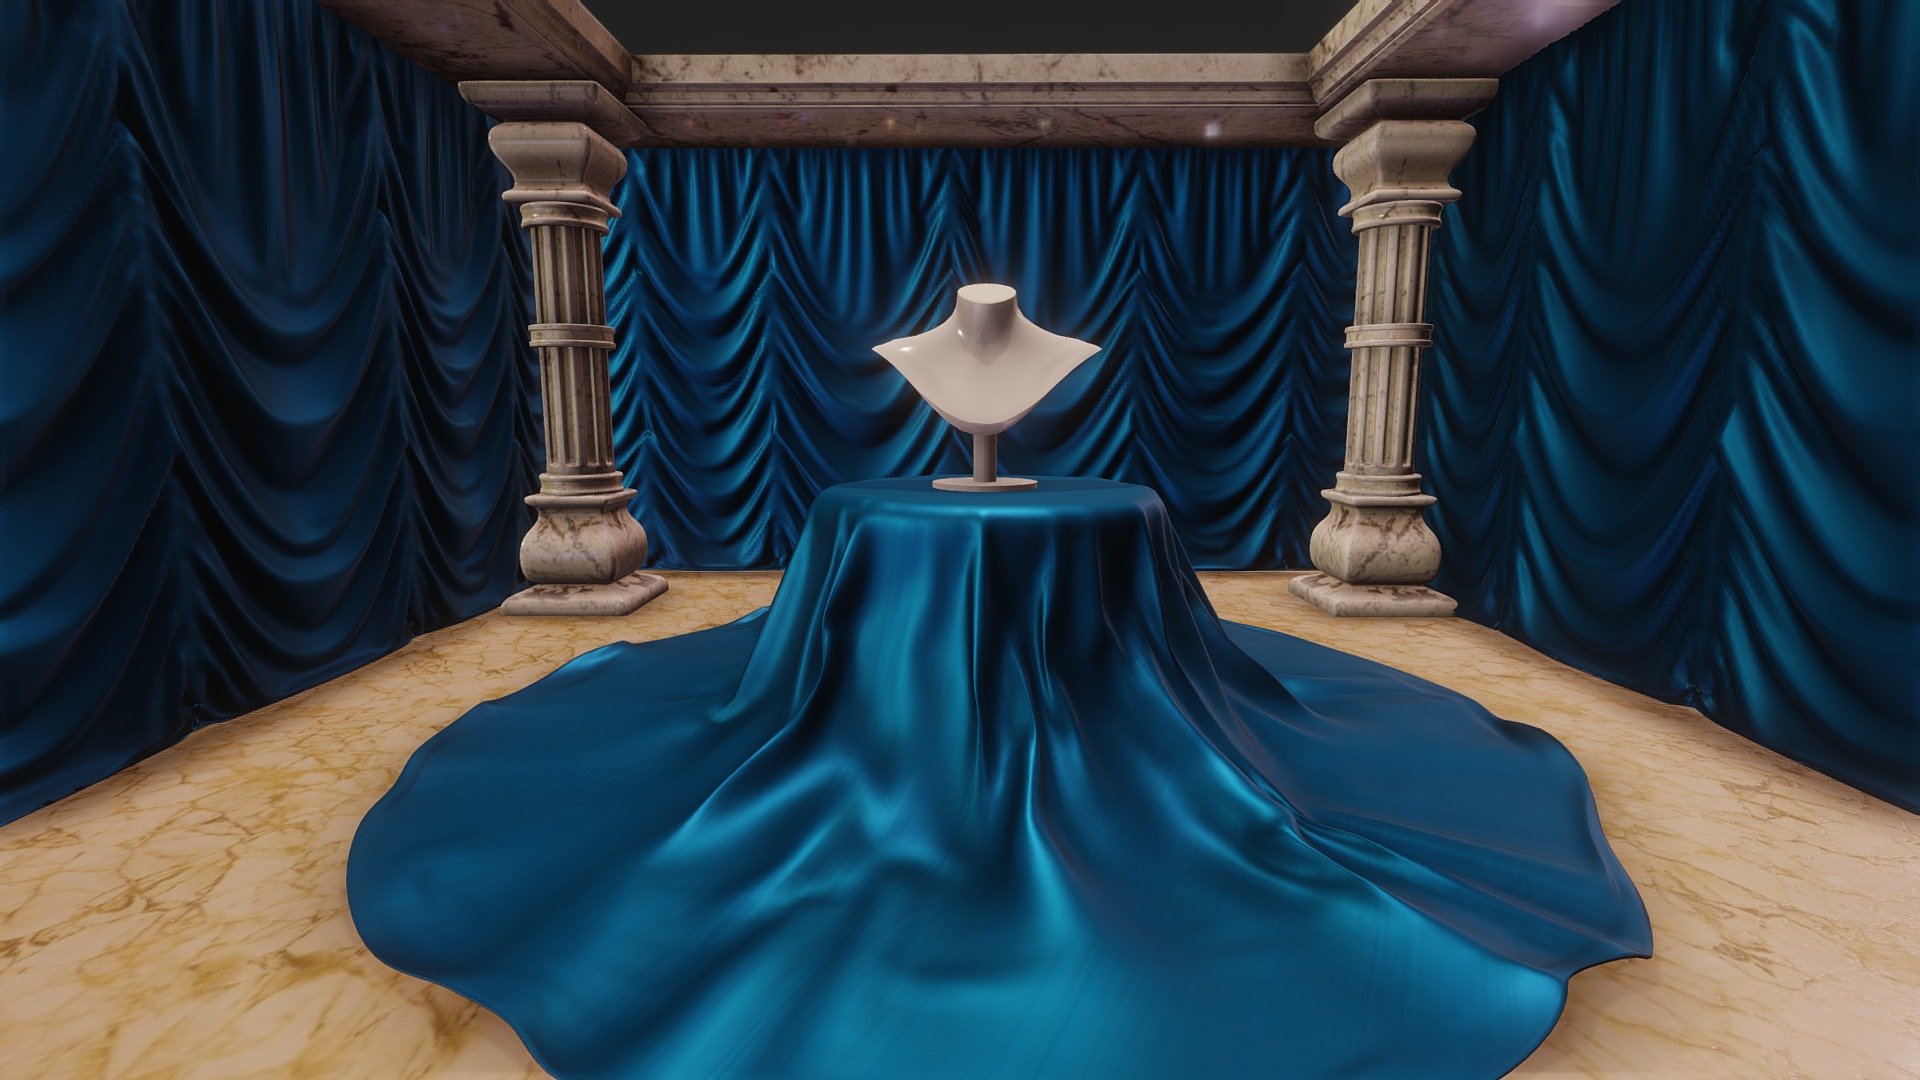 An exquisite showcase environment to stage your Jewelry items such as neclaces and rings.  Use the bust area for neclaces and the area around it to place additional items 3d model